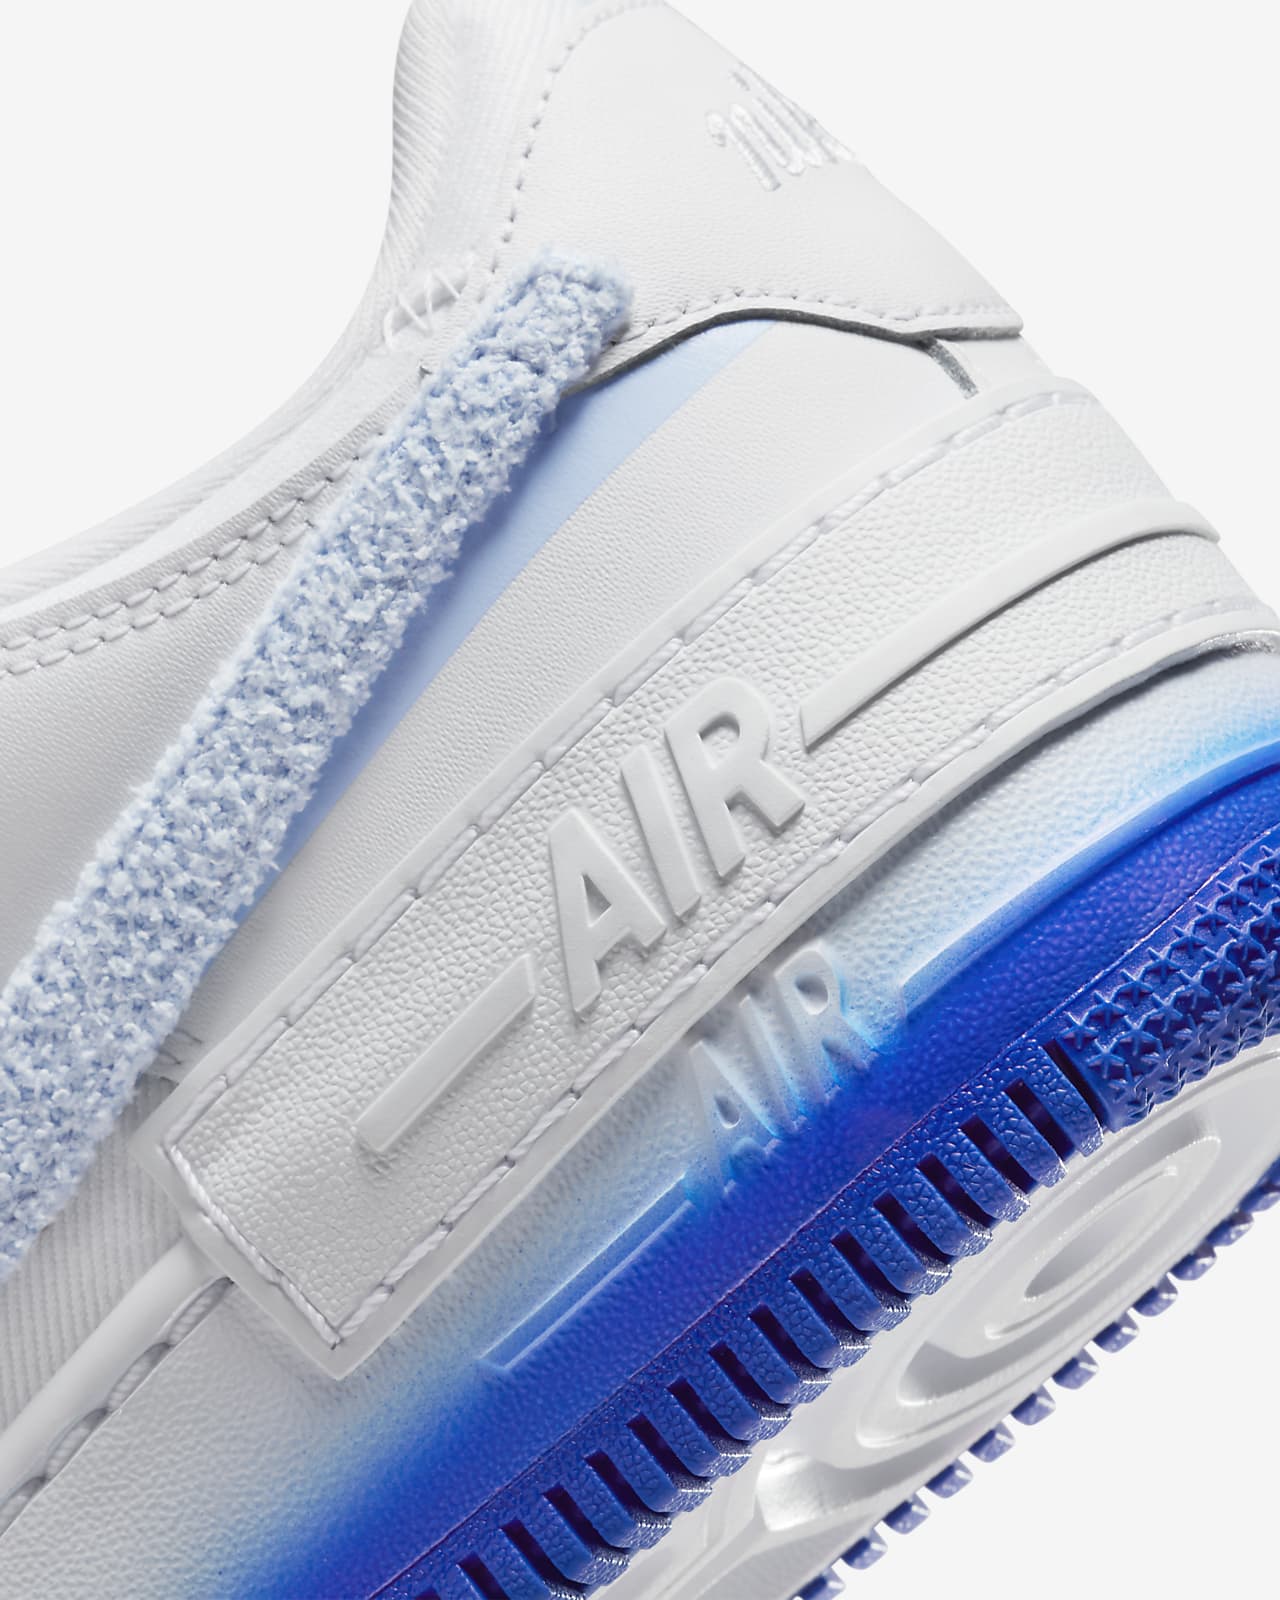 Nike Presents New Racer Blue Air Force 1